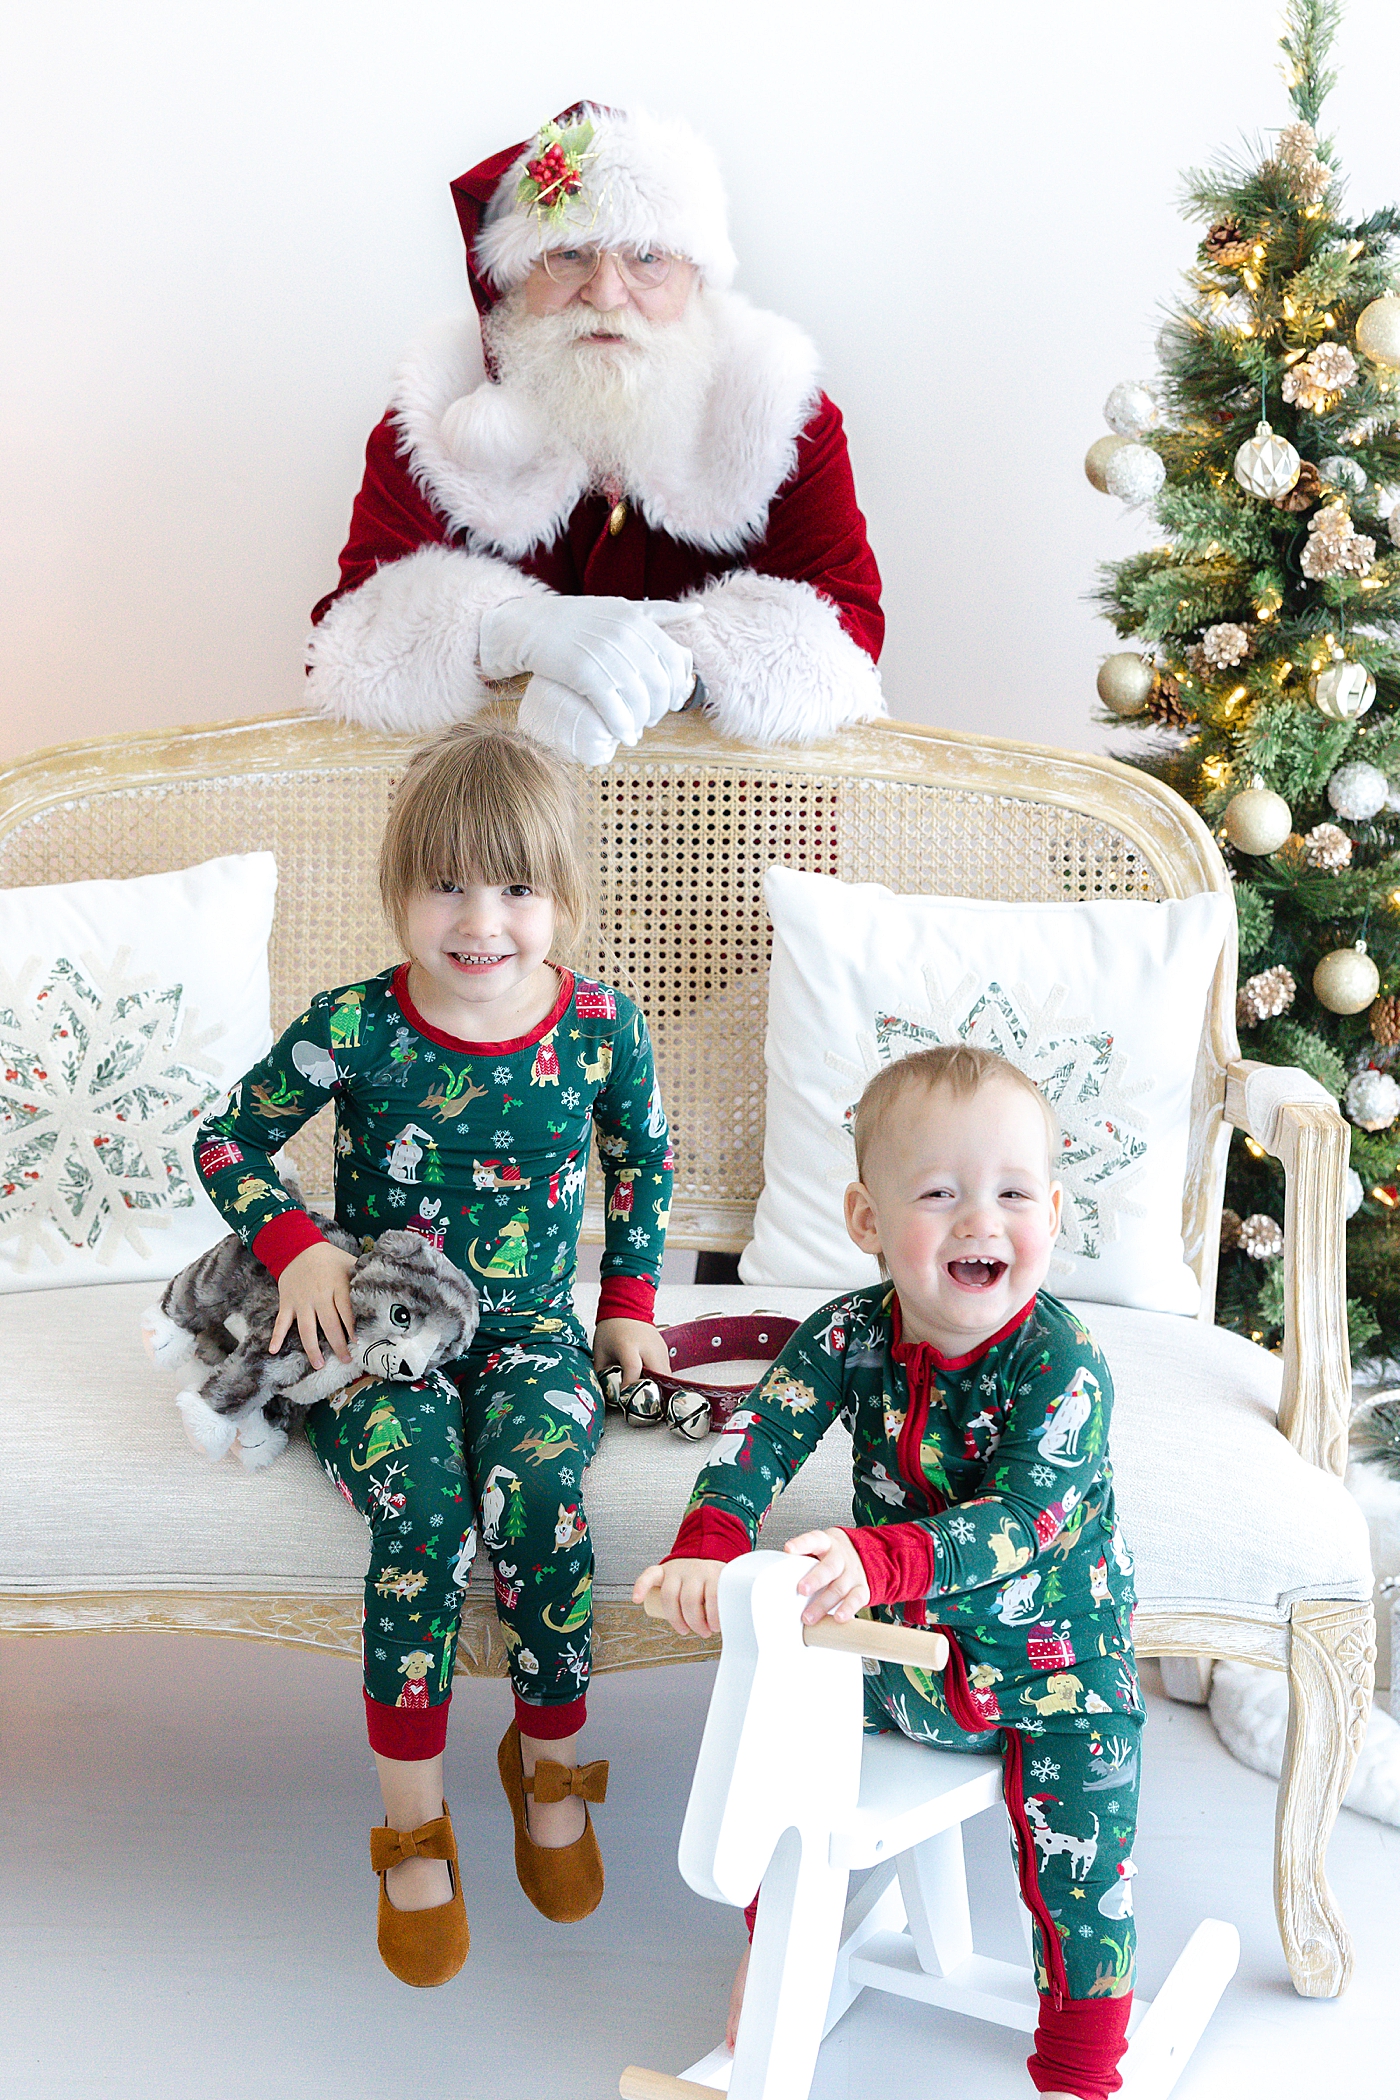 during Santa mini sessions in Austin | Image by Sana Ahmed Photography